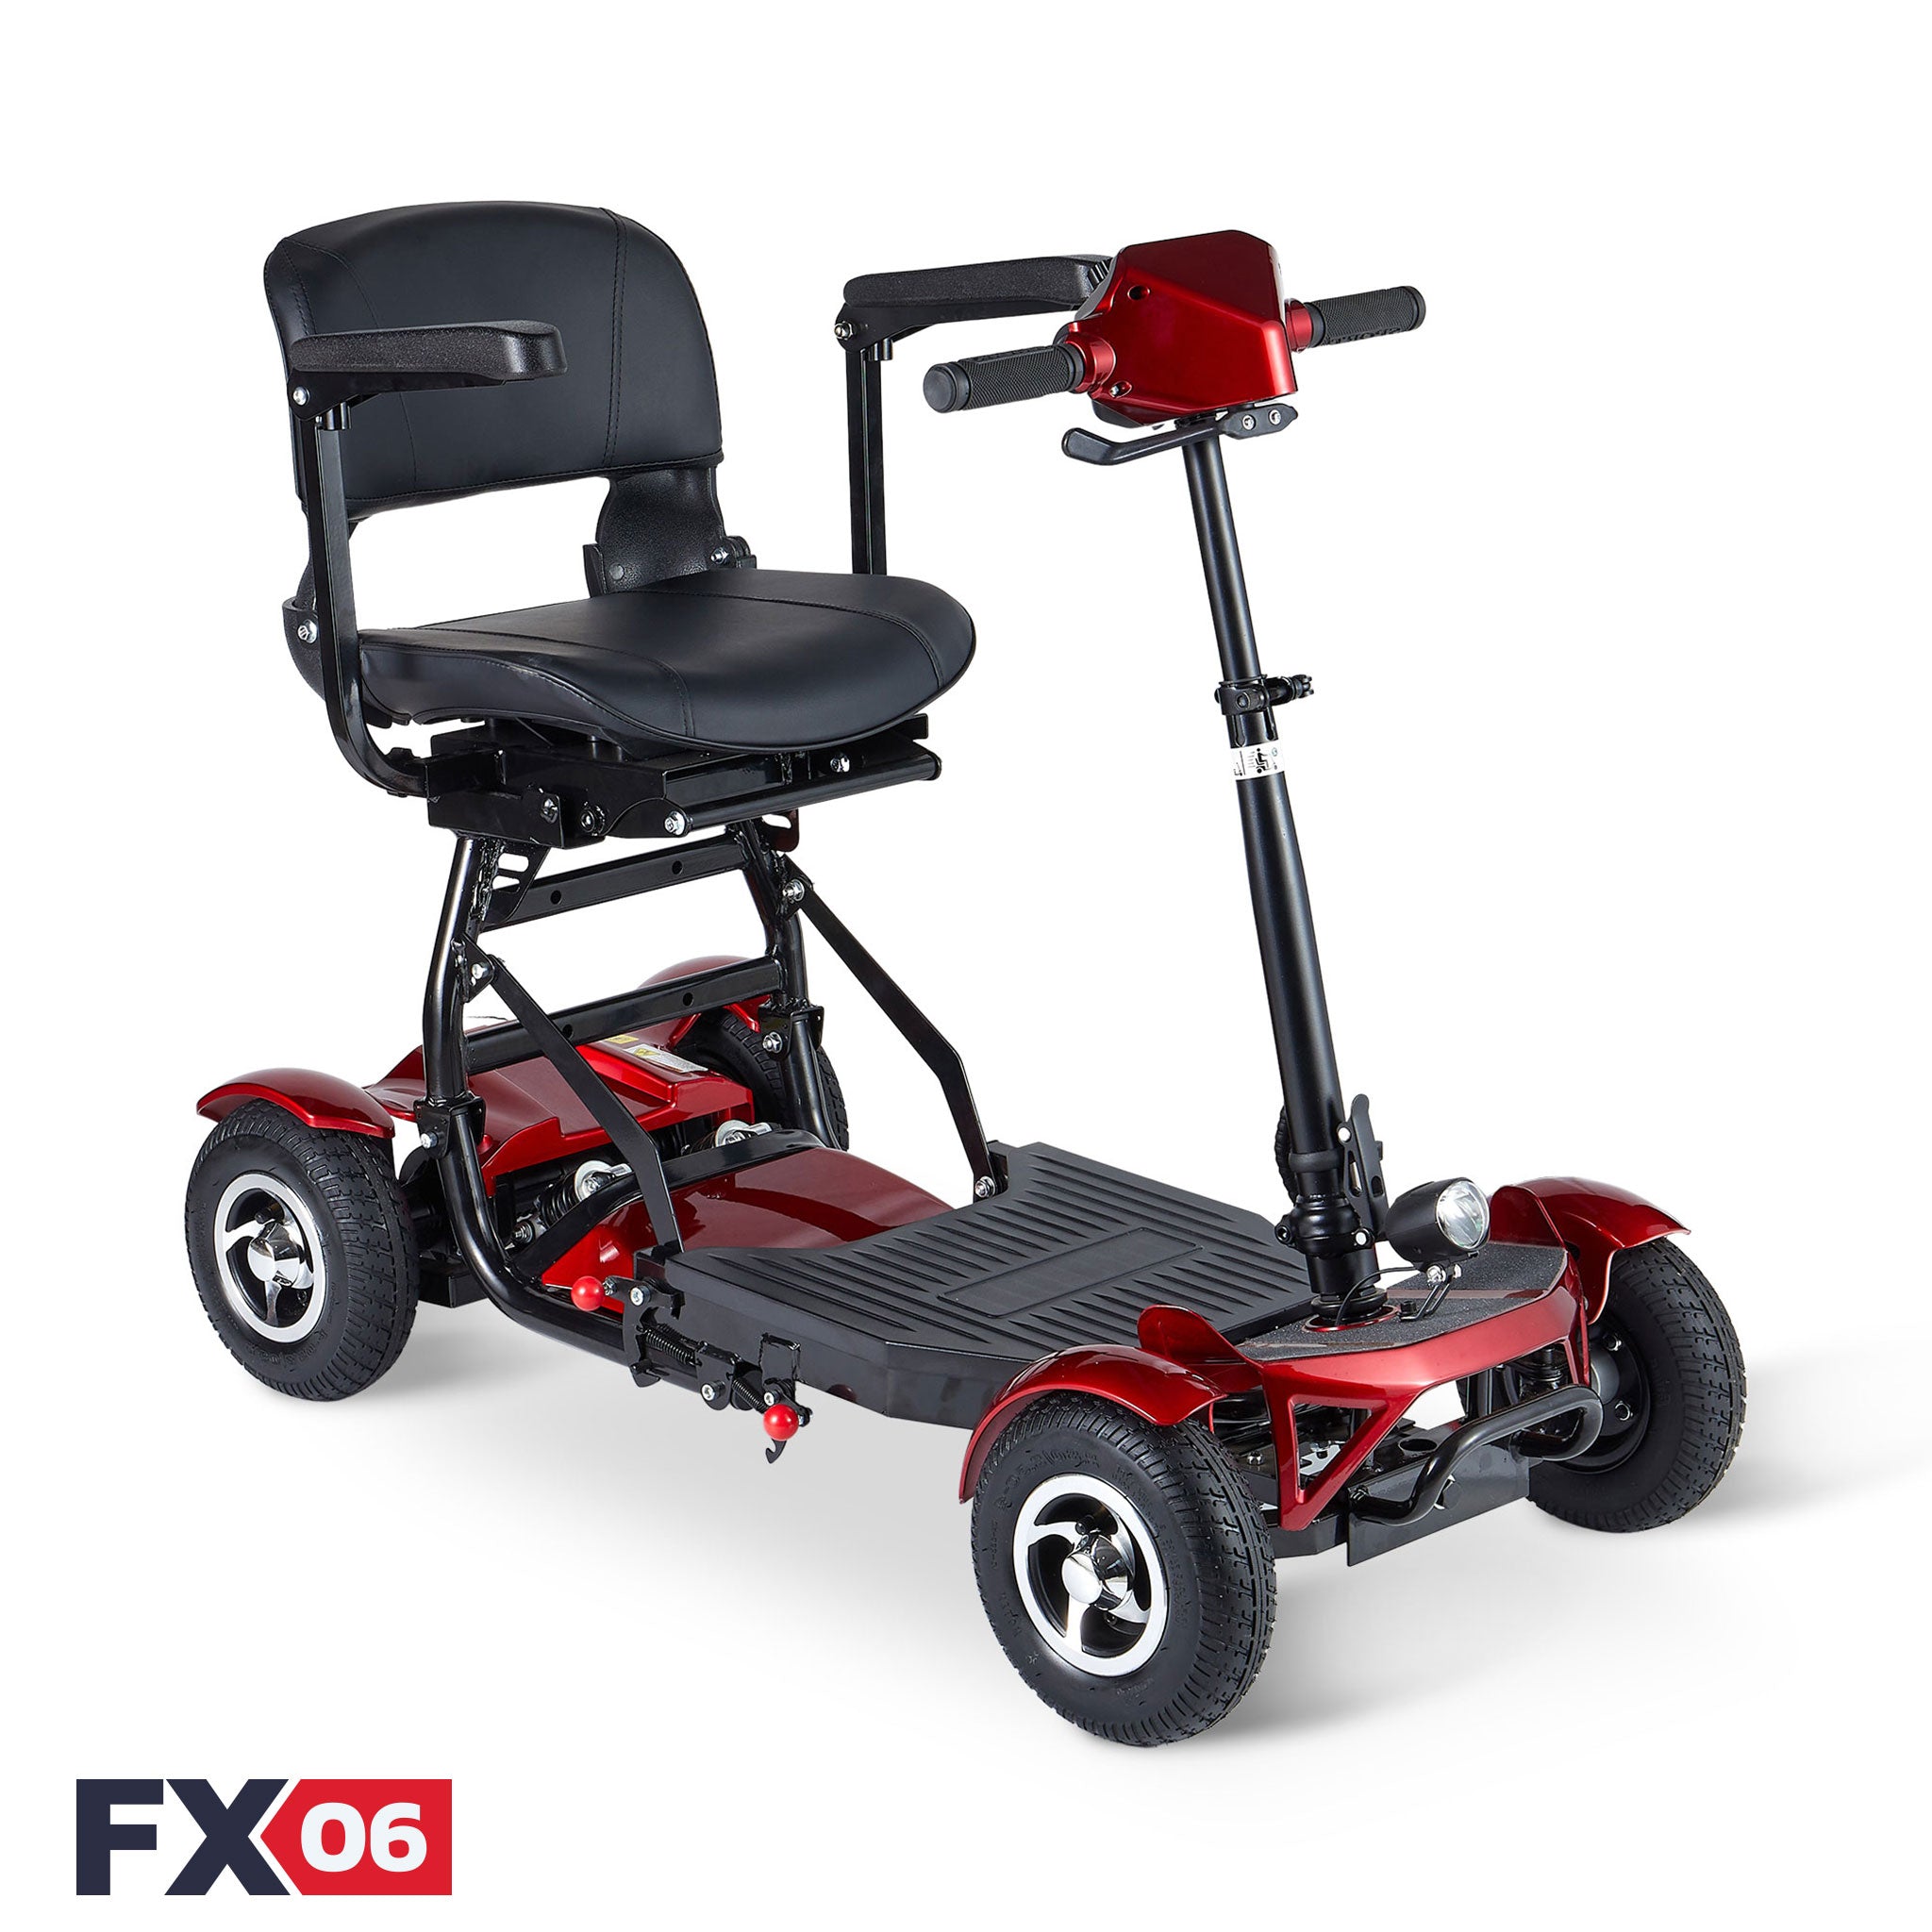 FX06 4-wheel mobility scooter